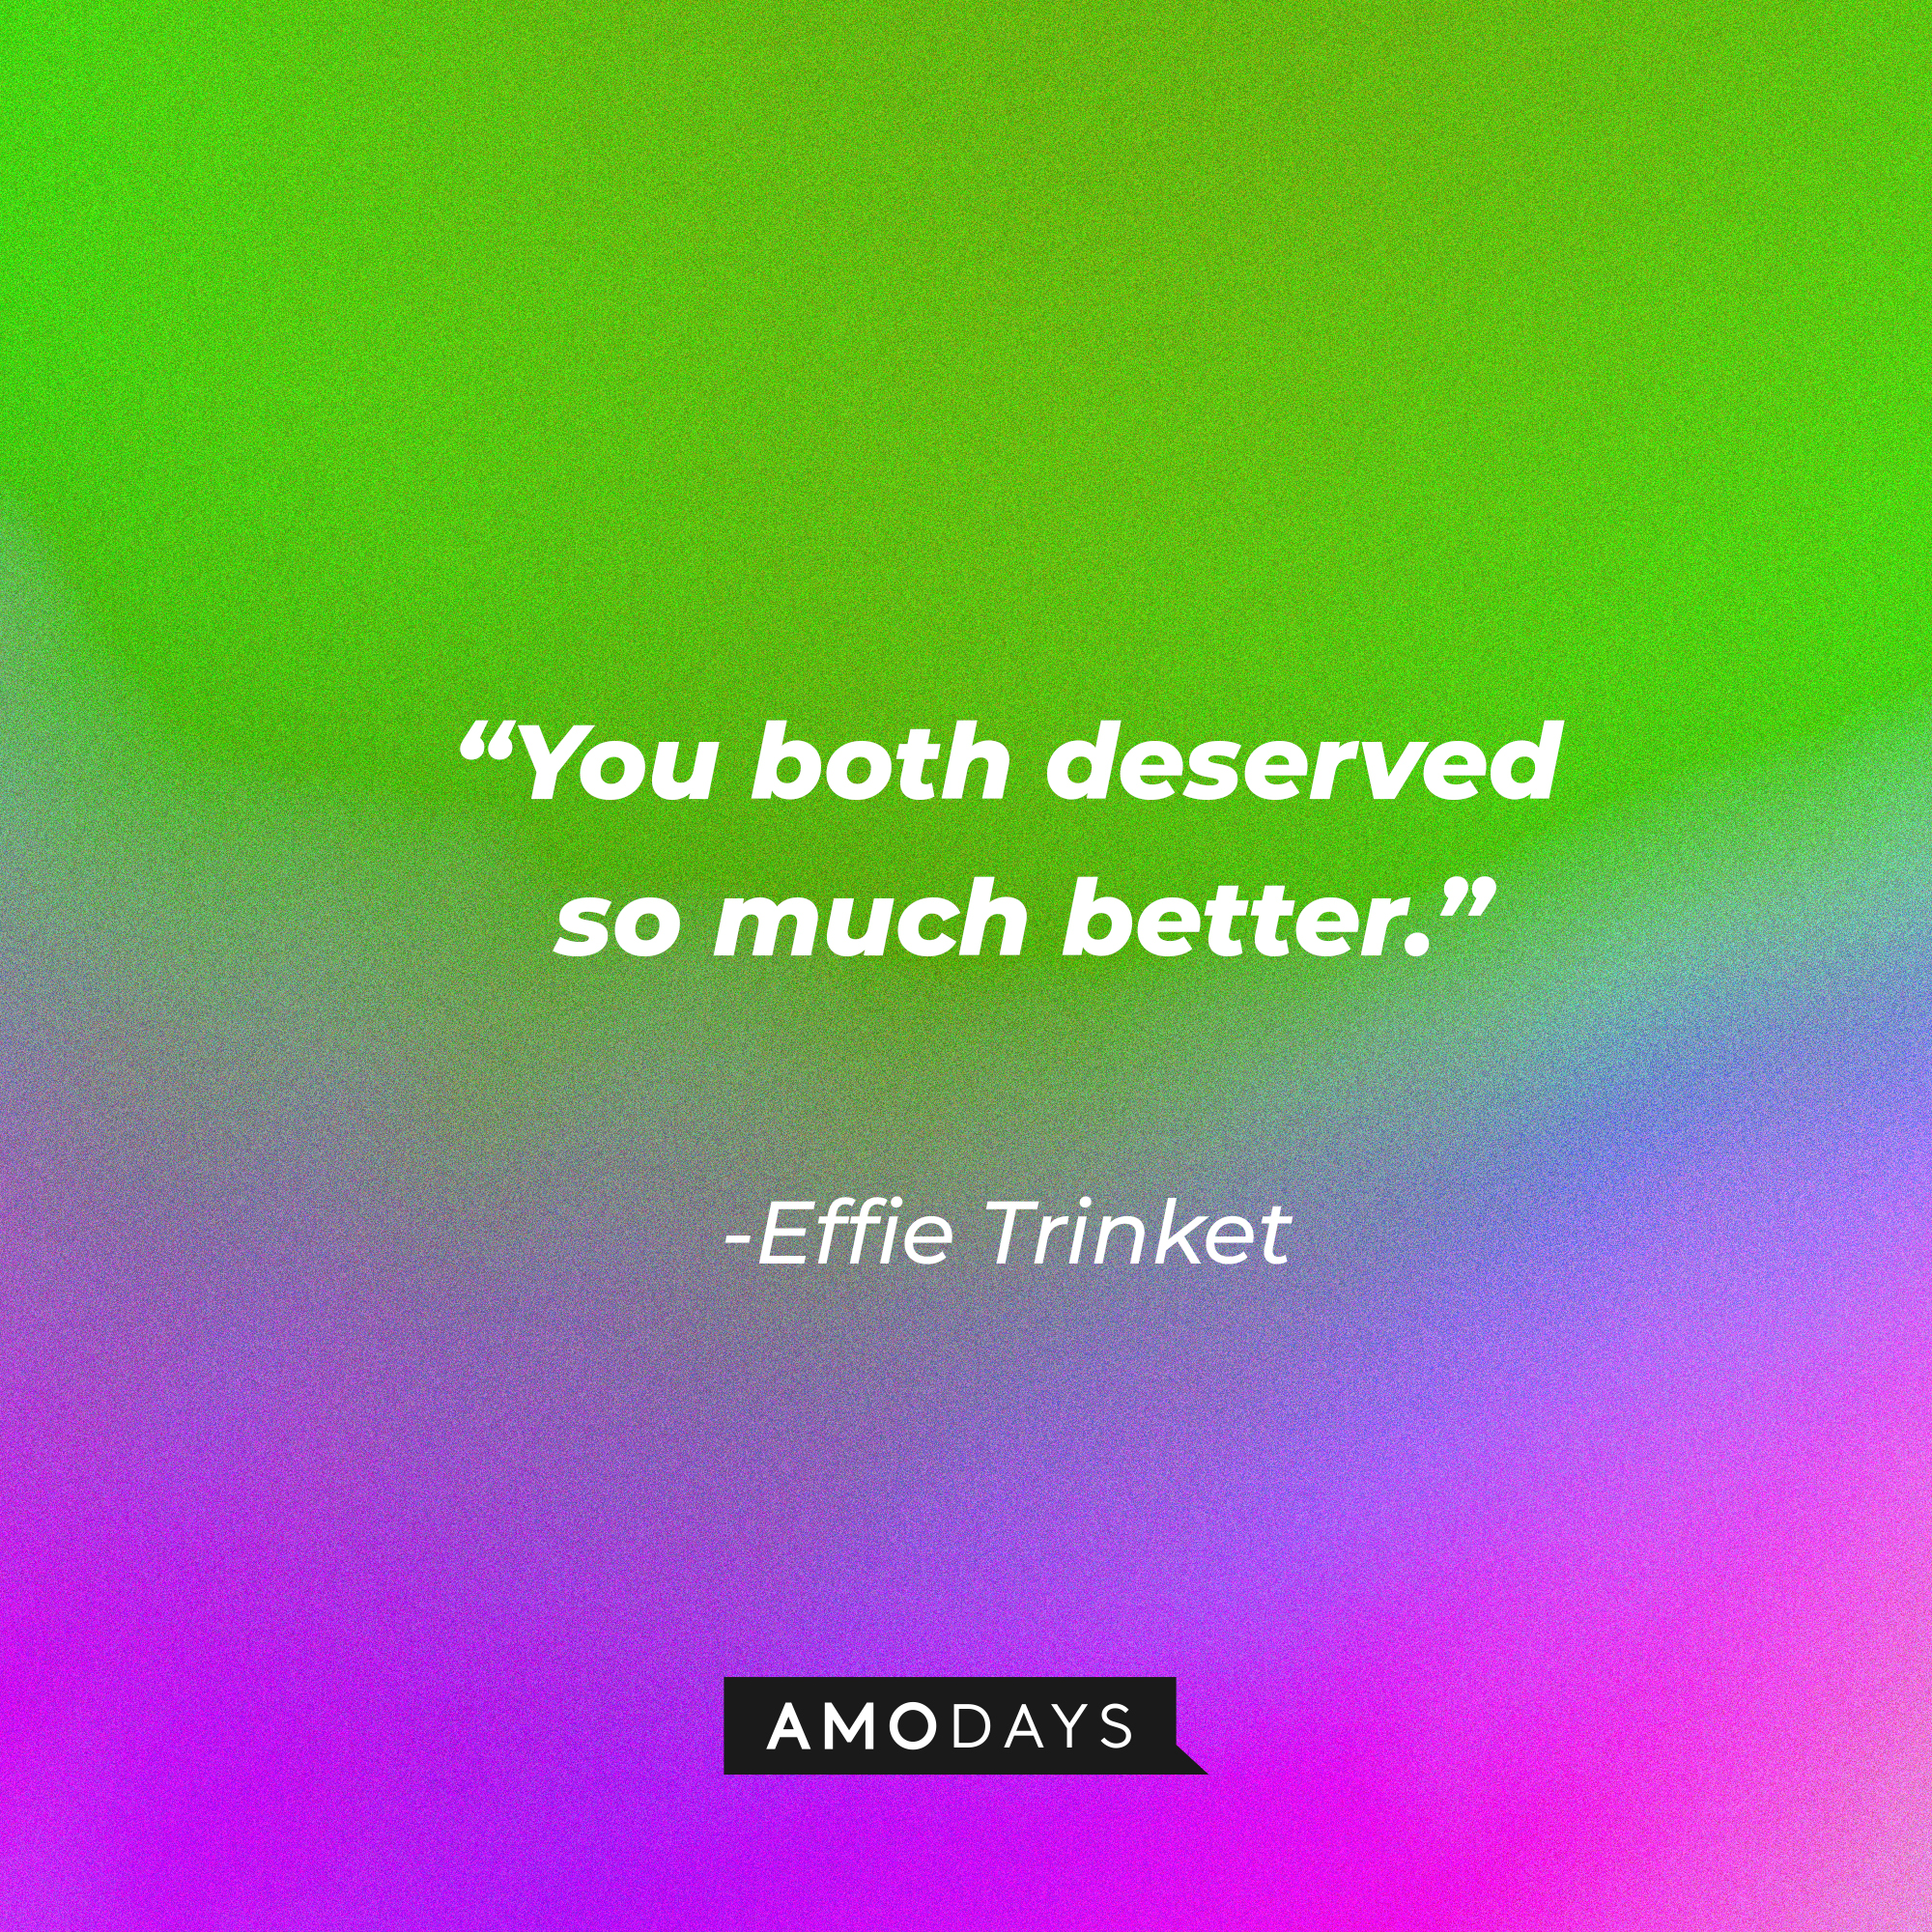 Effie Trinket's quote: “You both deserved so much better." | Source: AmoDays